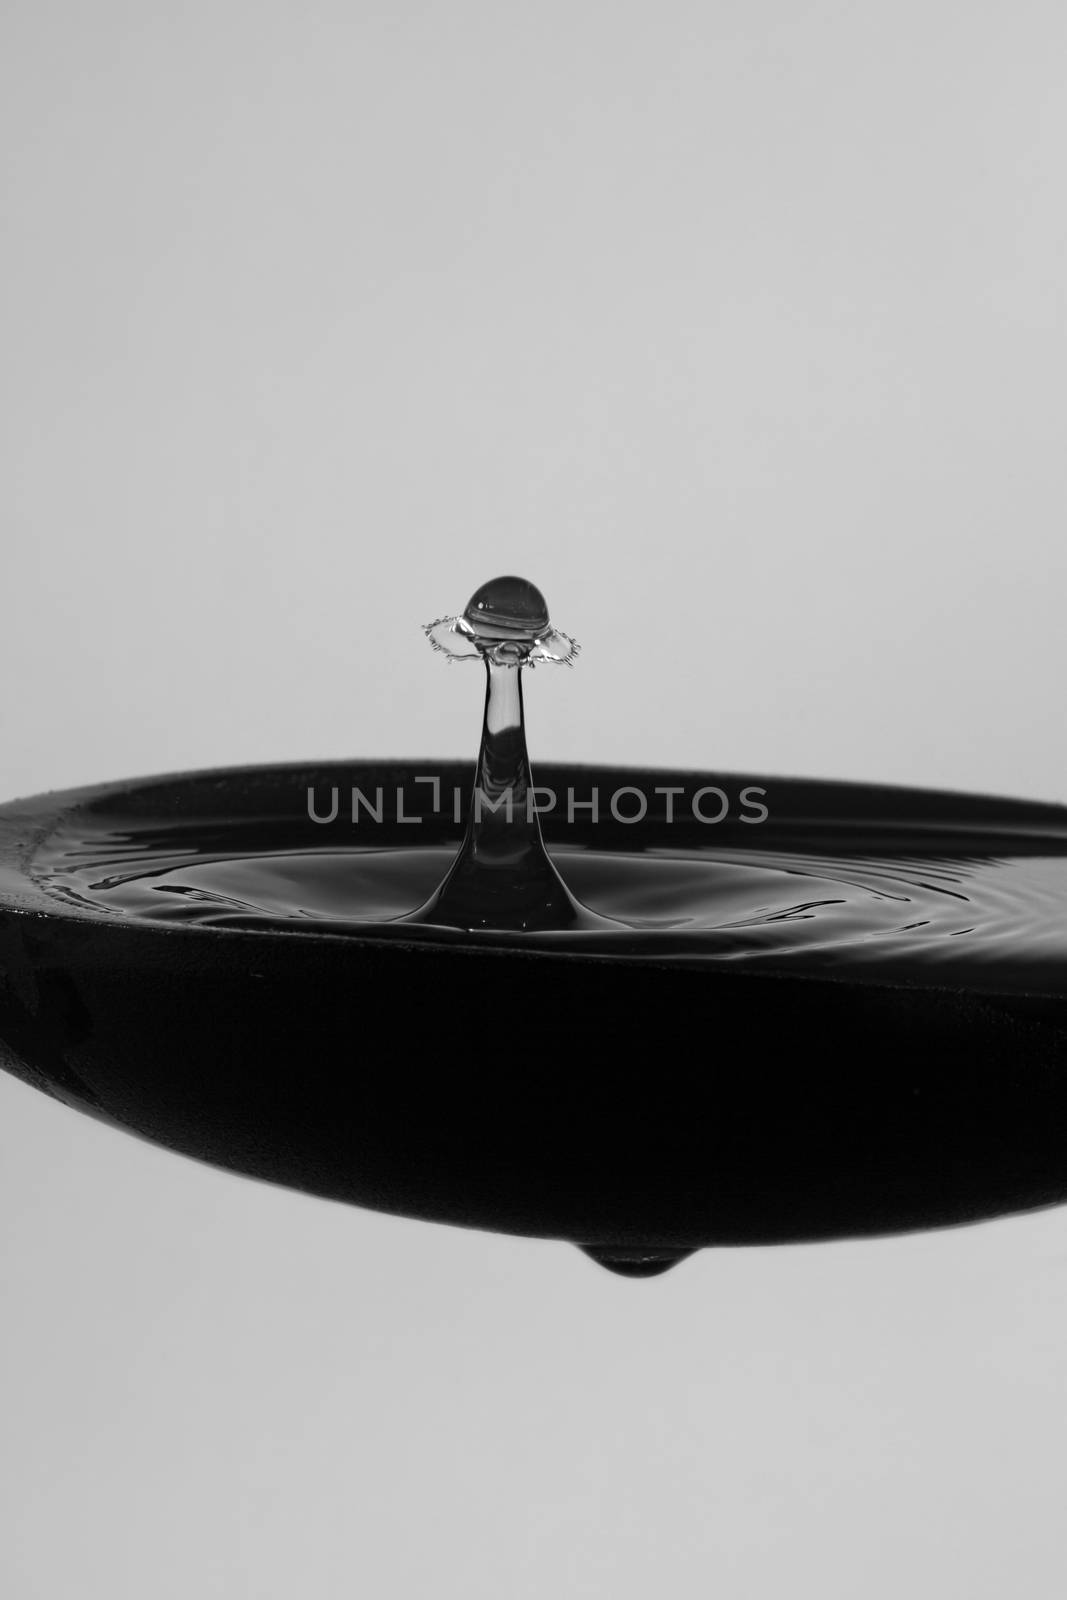 Water Drop Splashes To Create Shapes In A Soup Spoon by 	JacksonStock